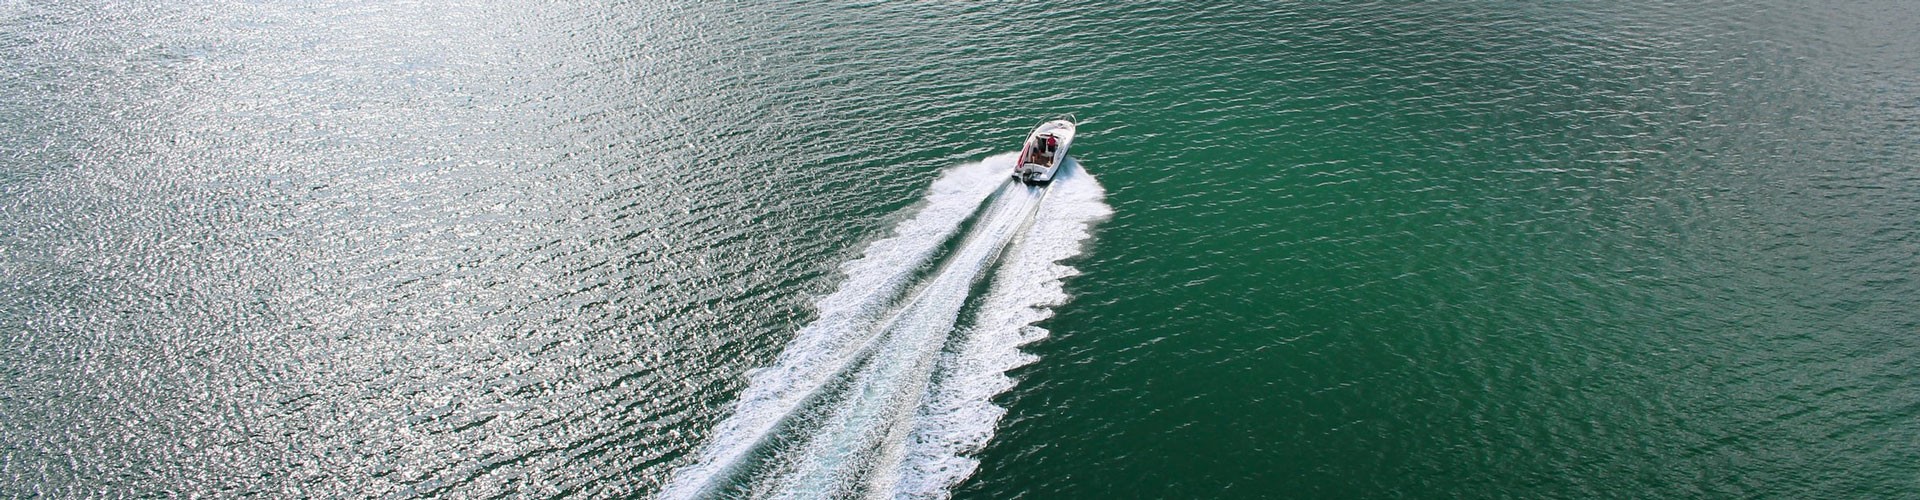 speedboat photographed from above on a calm green sea